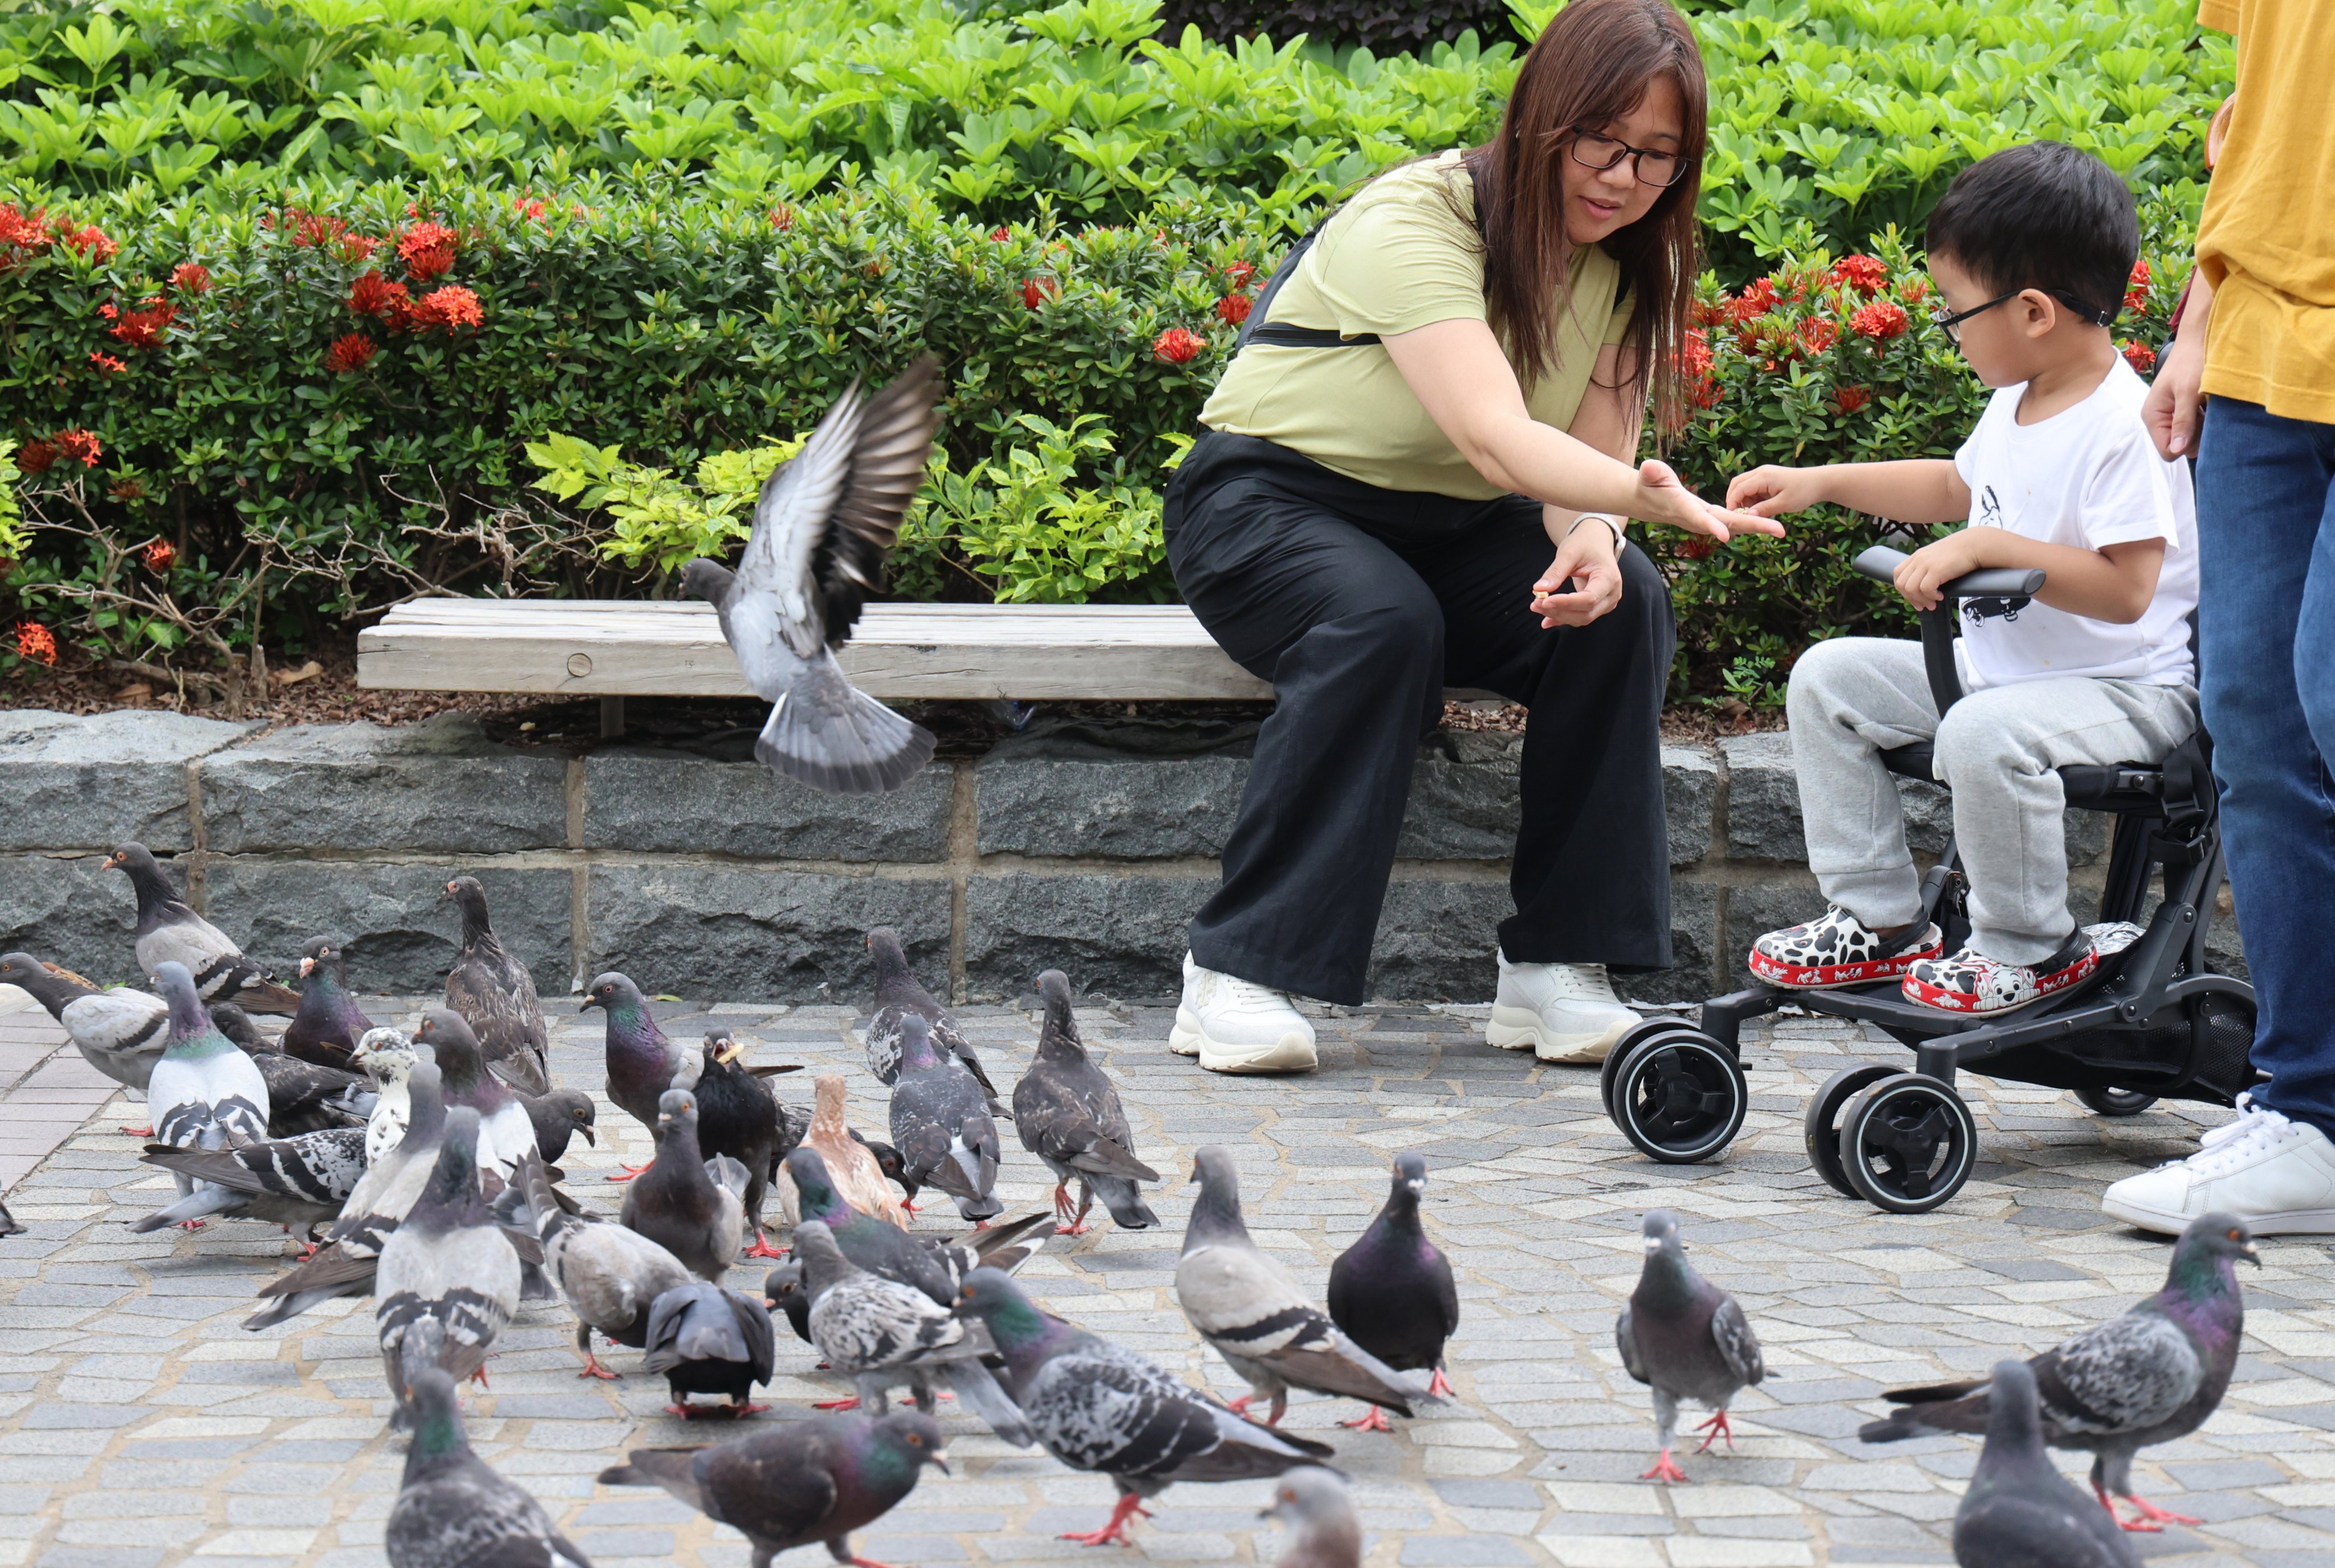 The city will also ban the feeding of pigeons from August 1. Photo: Jelly Tse